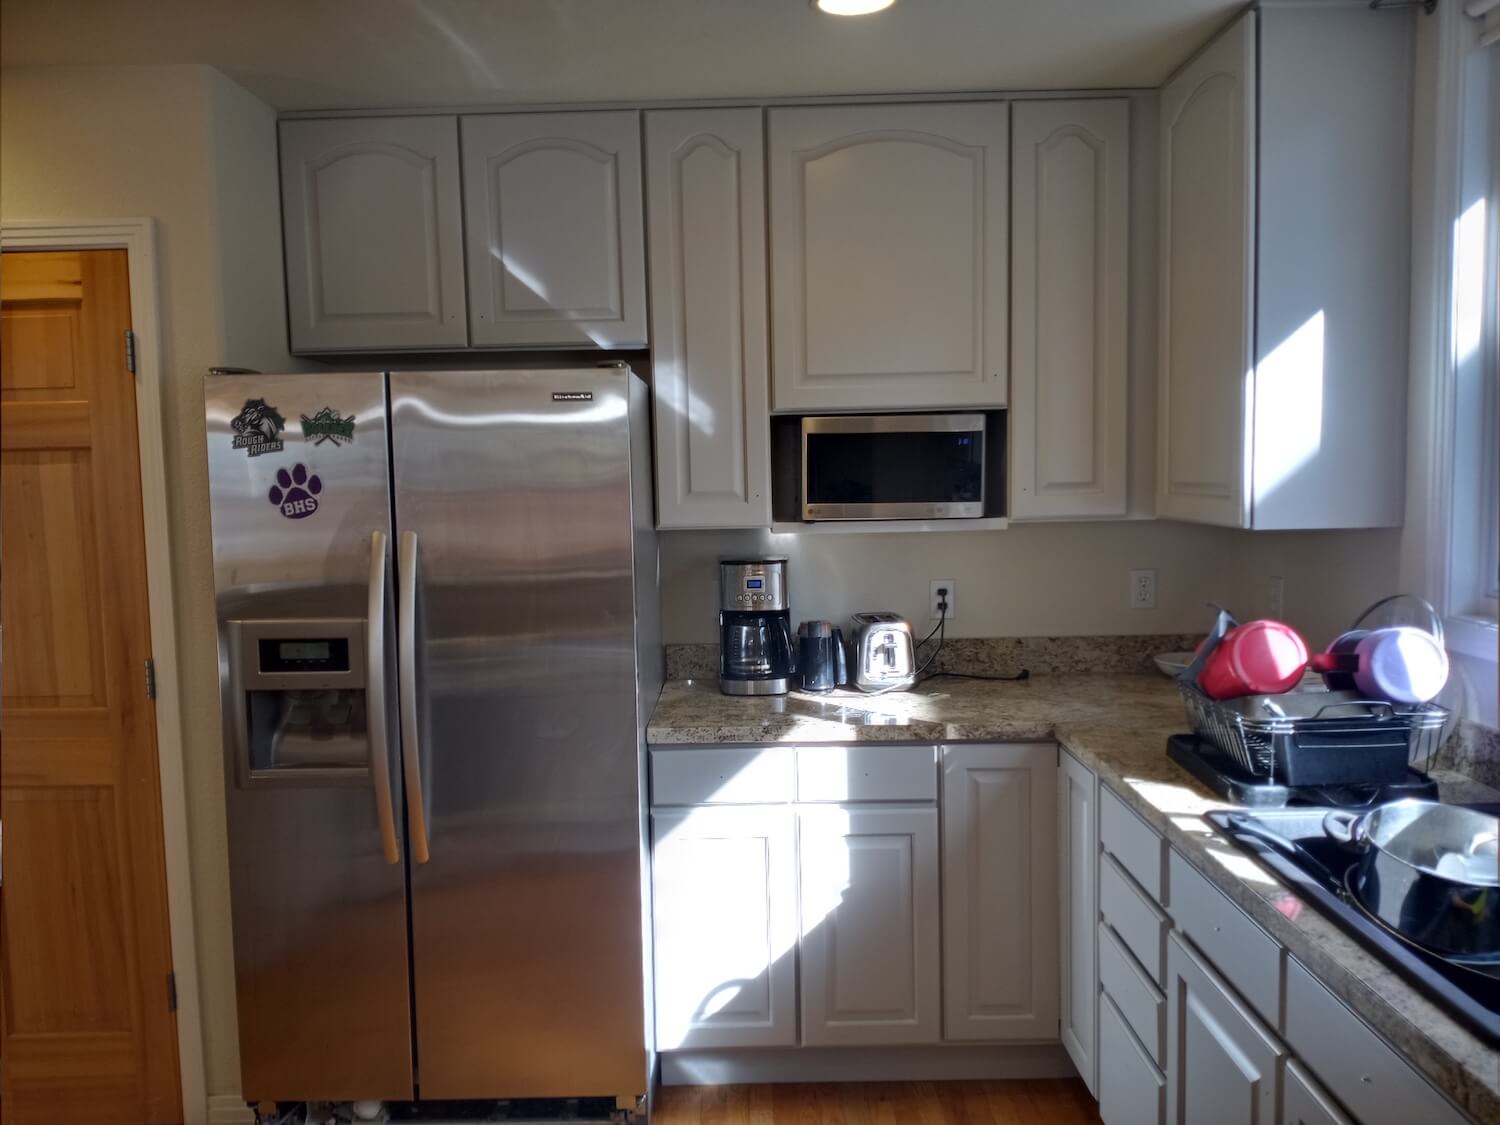 After-painting kitchen cabinets white